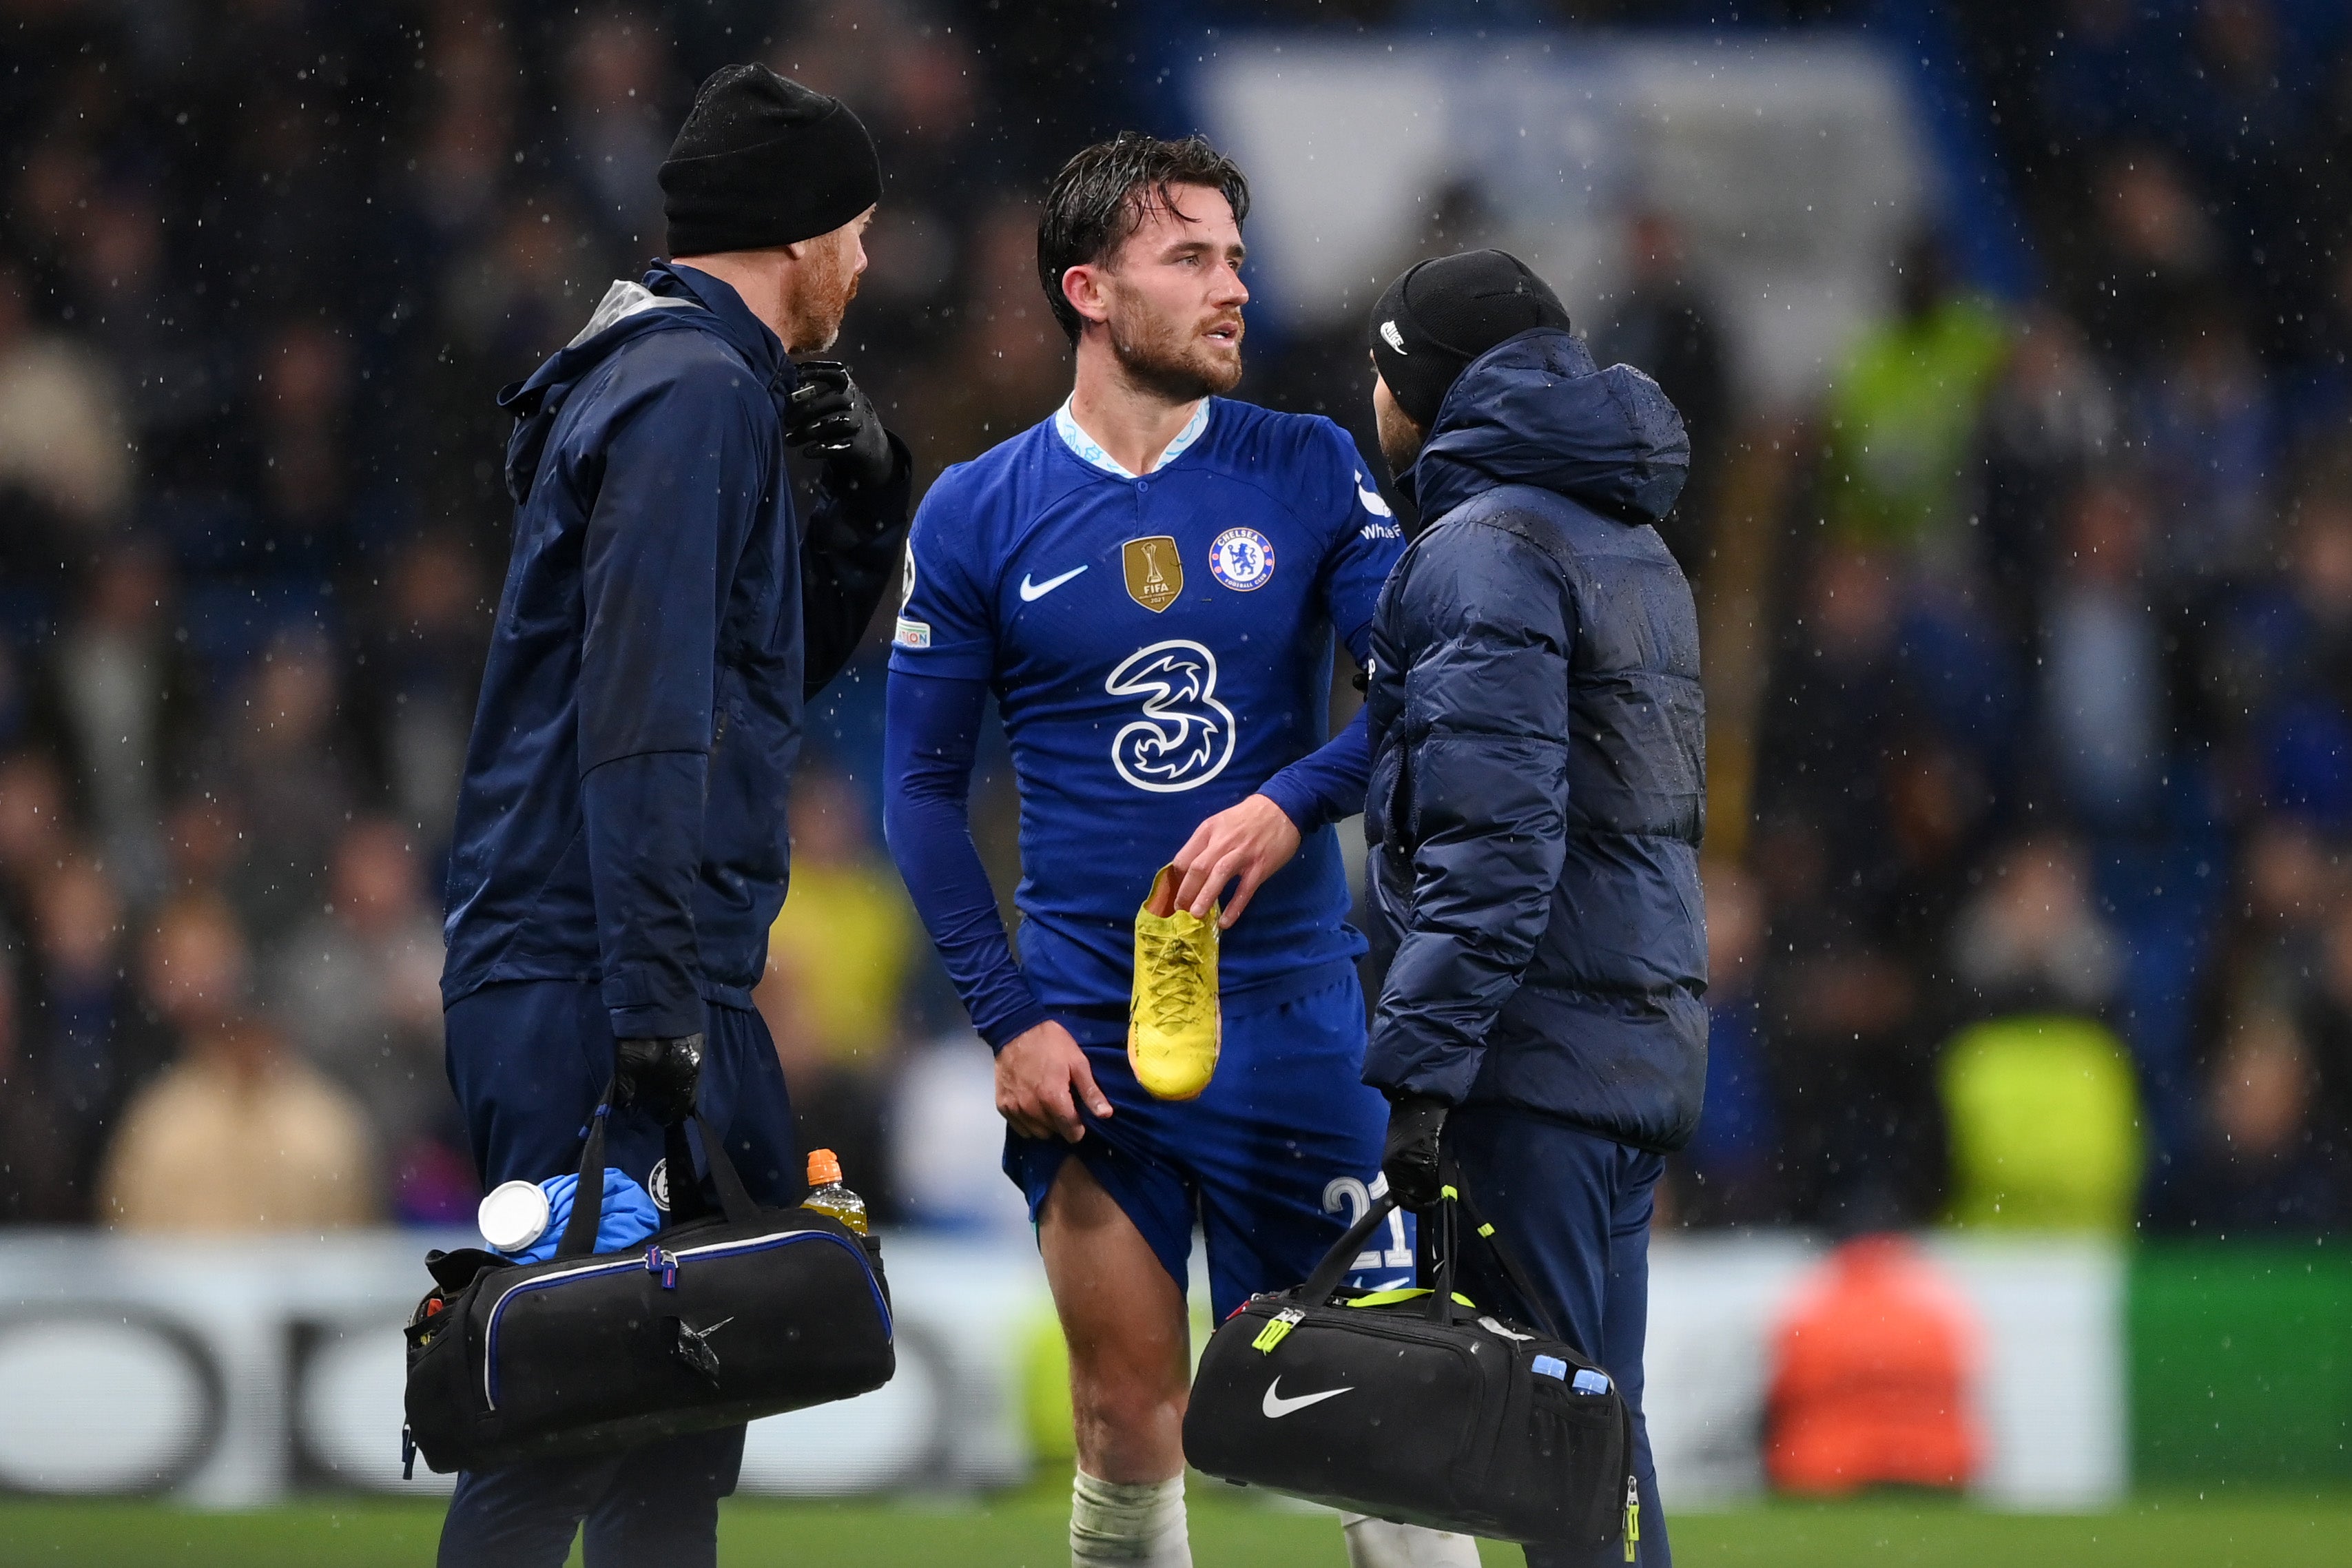 Ben Chilwell in discussion with medics at Stamford Bridge